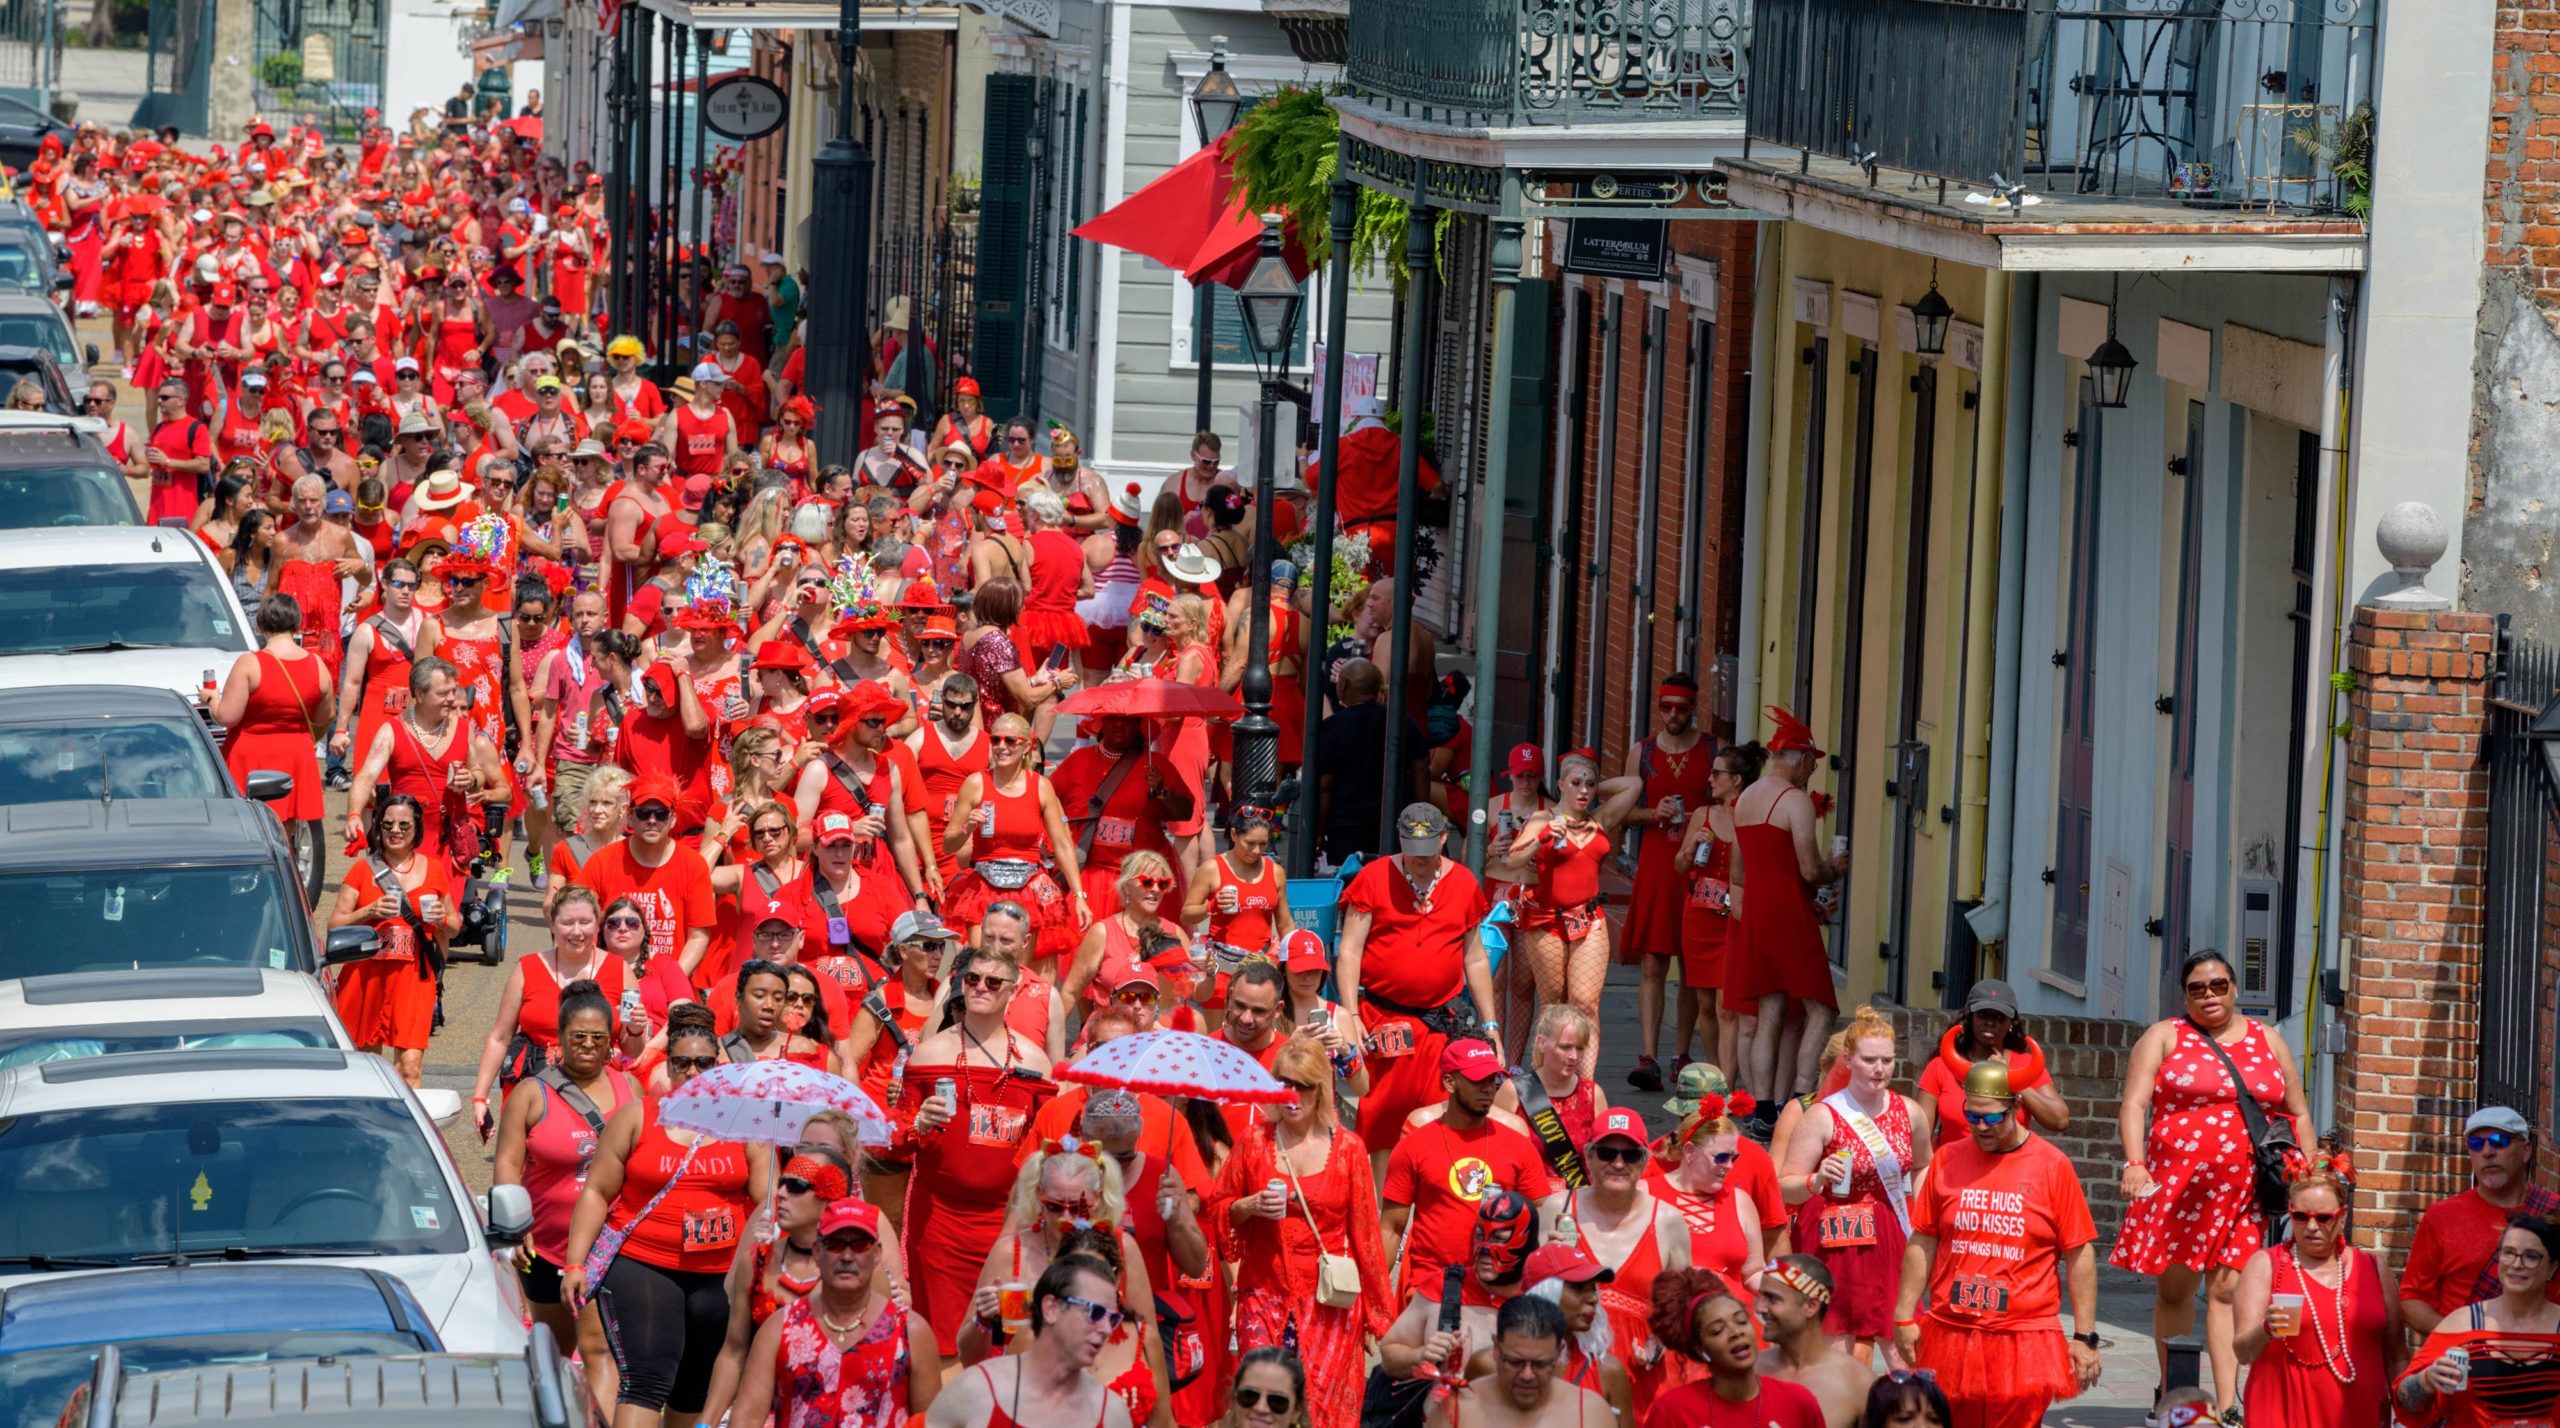 Runners take part 25th annual New Orleans Red Dress Run that is put on by the Hash House Harriers who call their group A Drinking Club with a Running Problem in New Orleans, La. Saturday, Aug. 10, 2019. The annual event also raises money for charities awarding over $1 million in grants over the years. Most people dont run and instead hang out in the French Quarter. Photo by Matthew Hinton